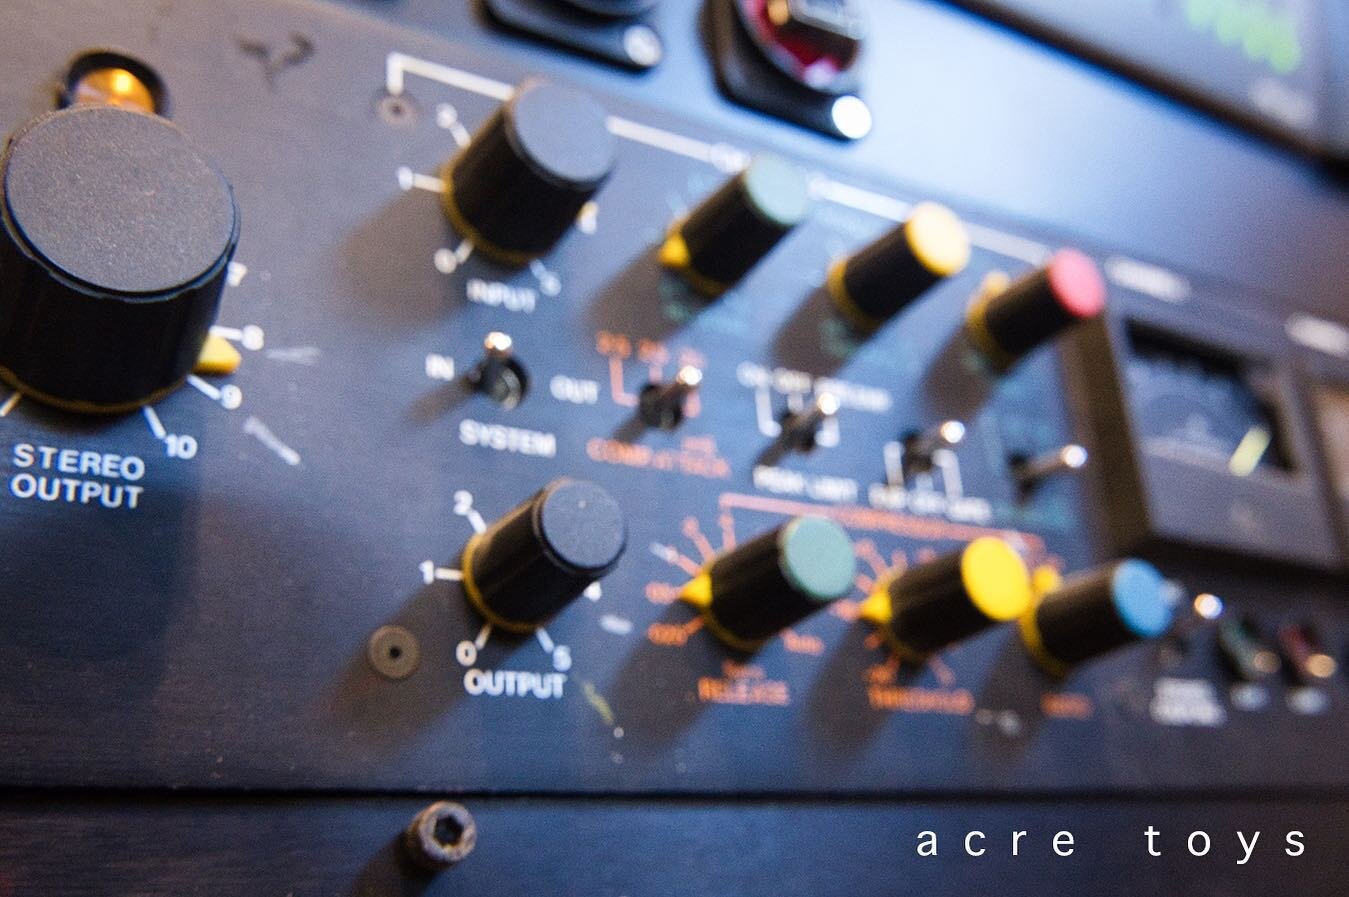 Acre toys #13 ADR Compex F760X-RS compressor/ limiter
 
I want to share some of my favorite toys used at ACRE.  These scribblings are independent thoughts with no affiliation to any company and will be intentionally unscientific...
 
Yes yes, &rsquo;